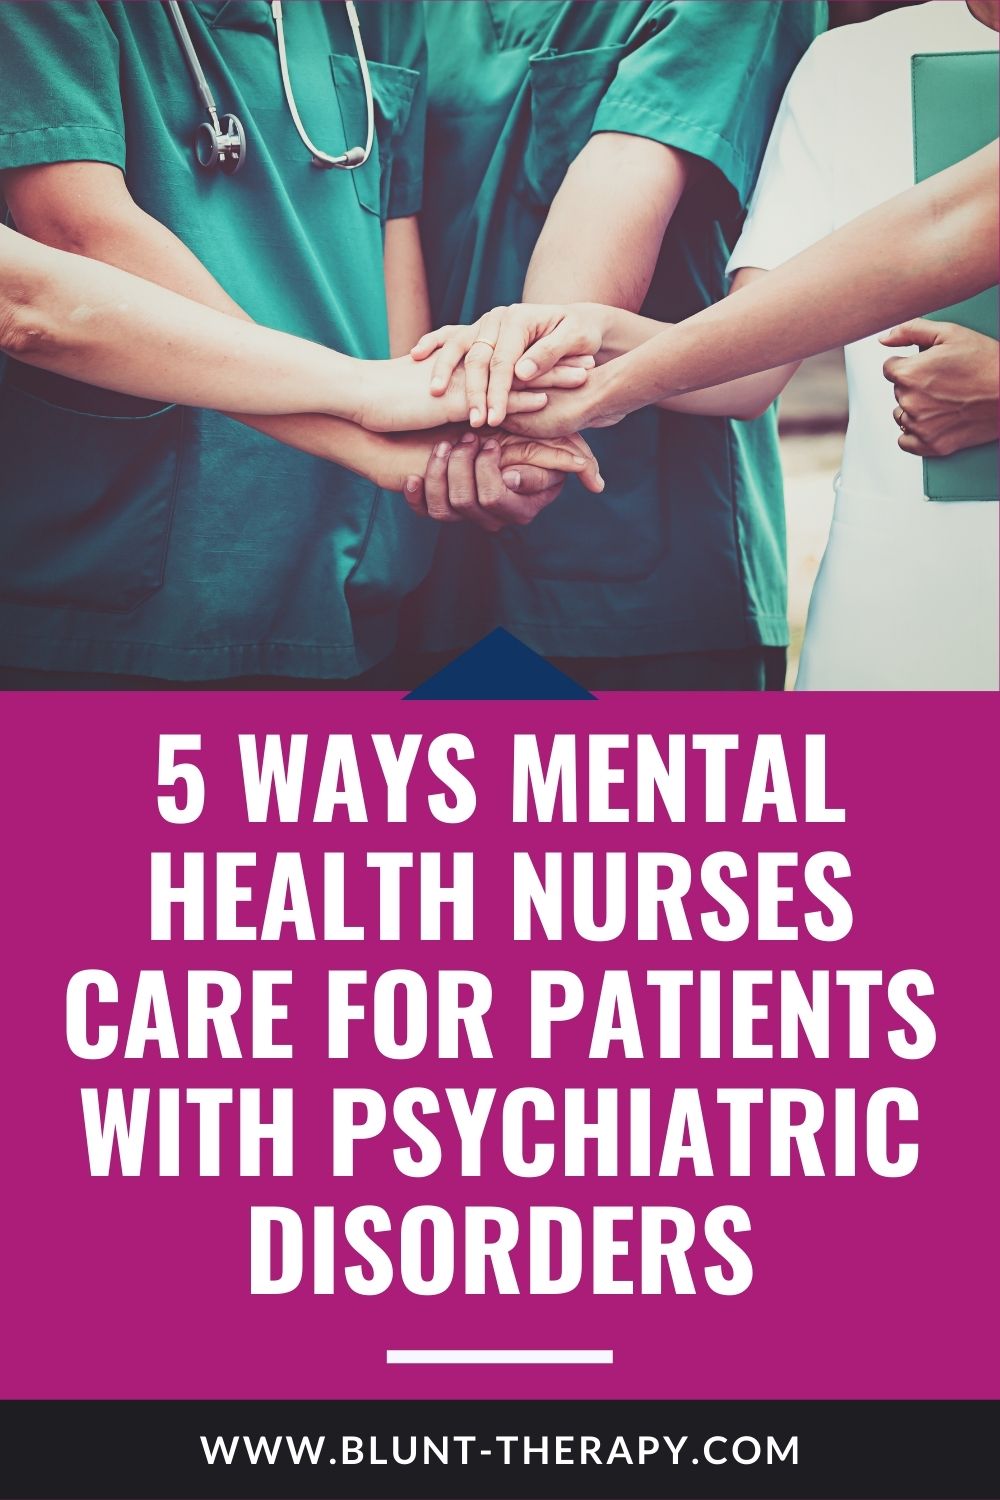 5 Ways Mental Health Nurses Care for Patients With Psychiatric Disorders